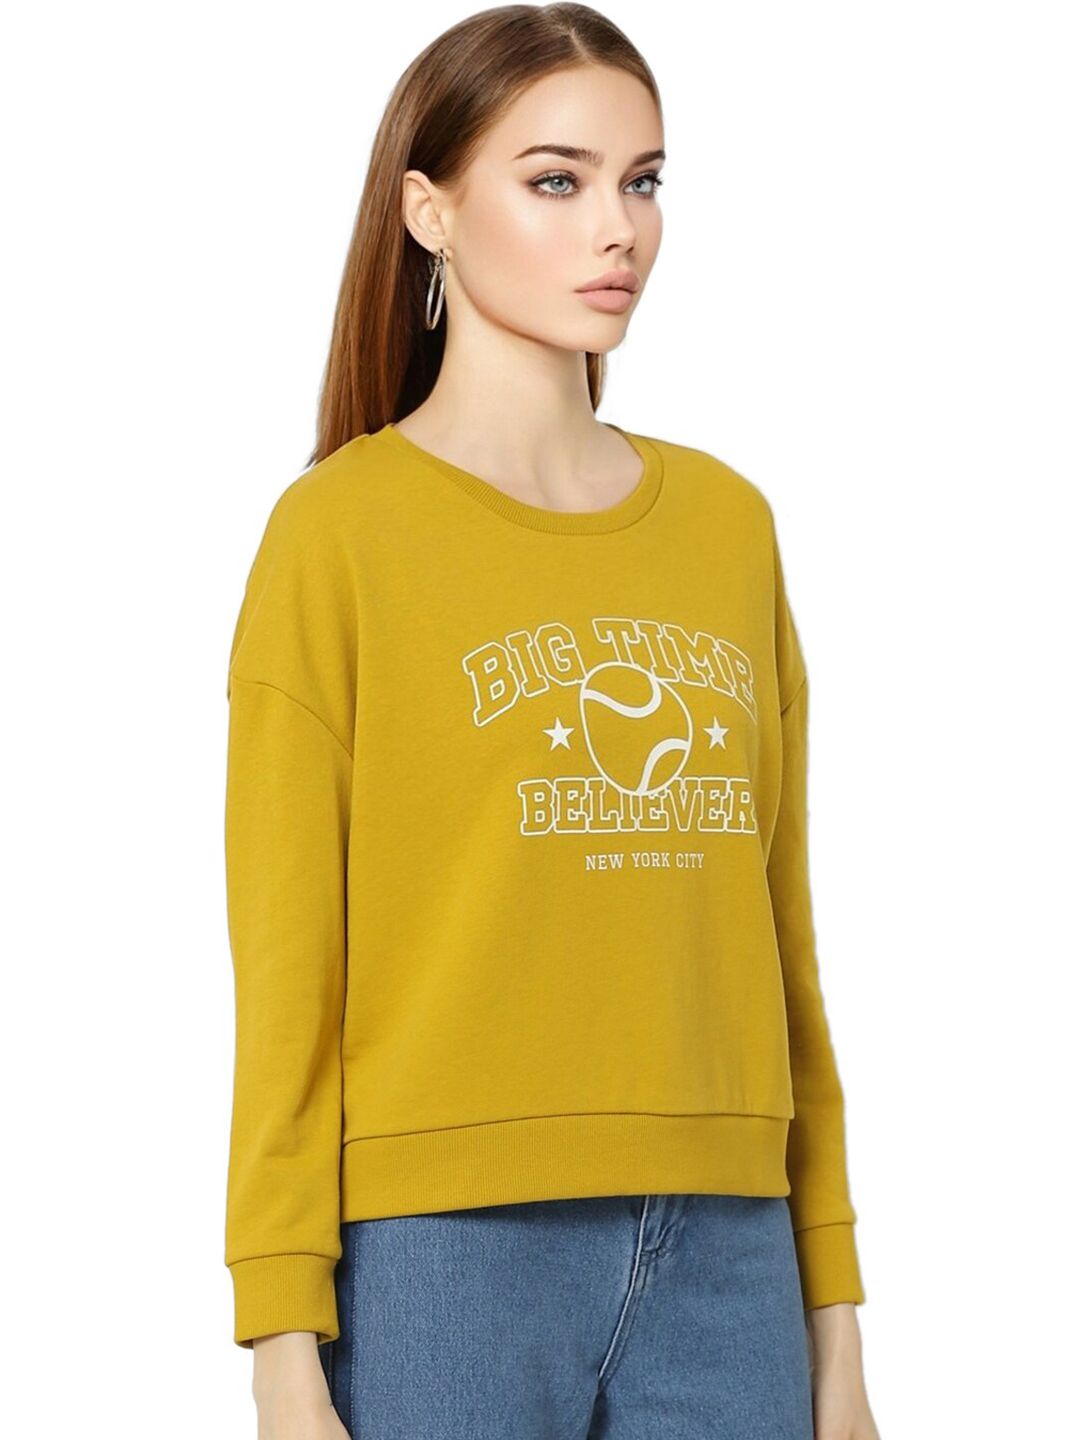 ONLY Women Olive Green Printed Sweatshirt Price in India